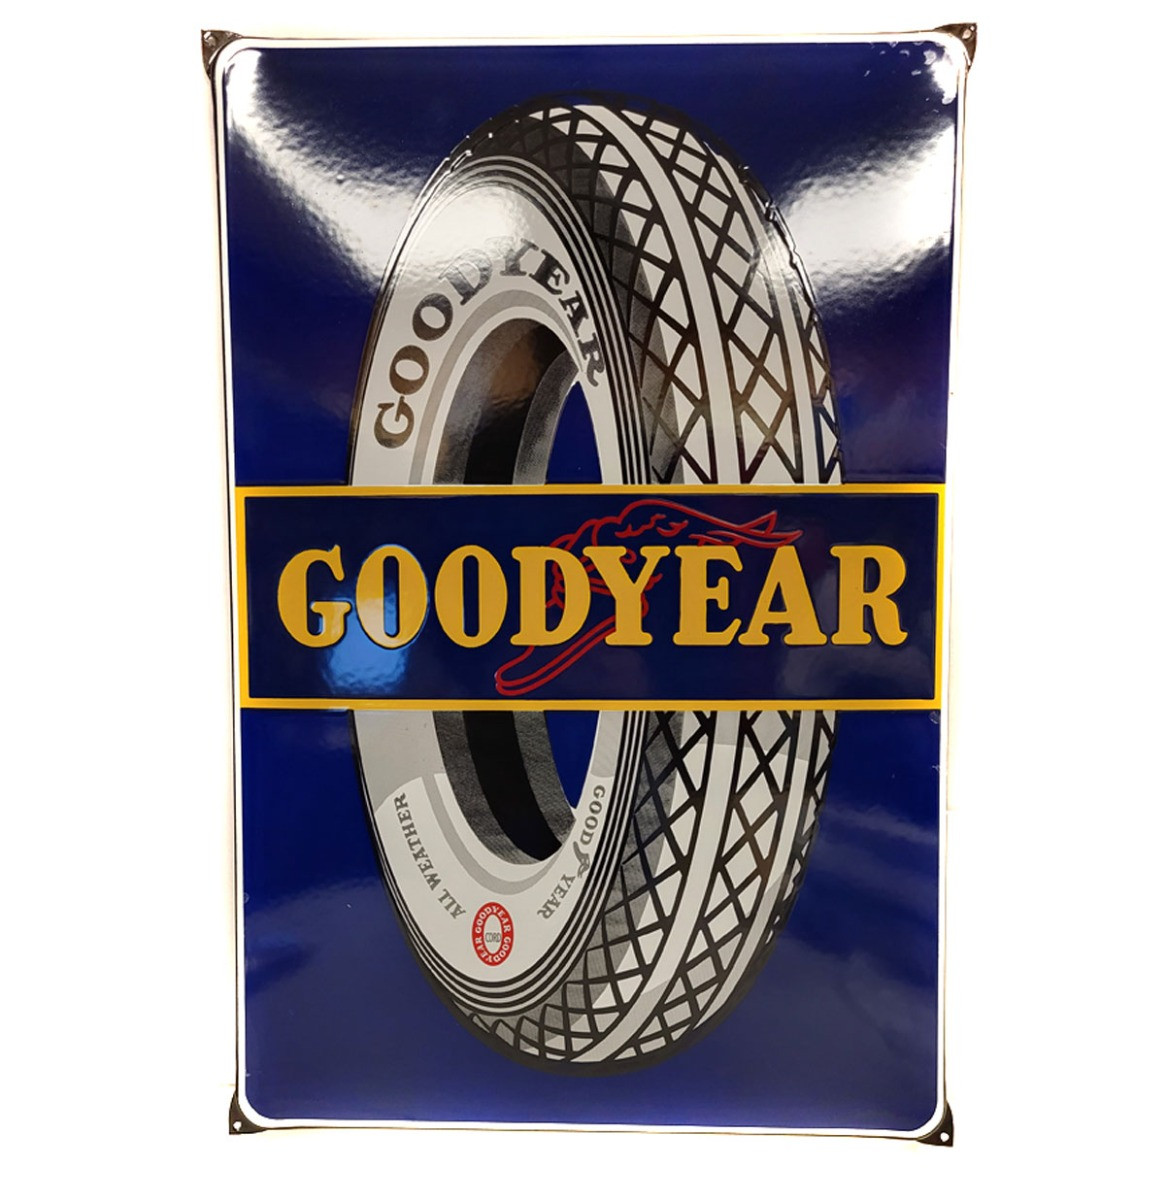 Goodyear Tires Wheel Emaille Bord - 60 x 40 cm